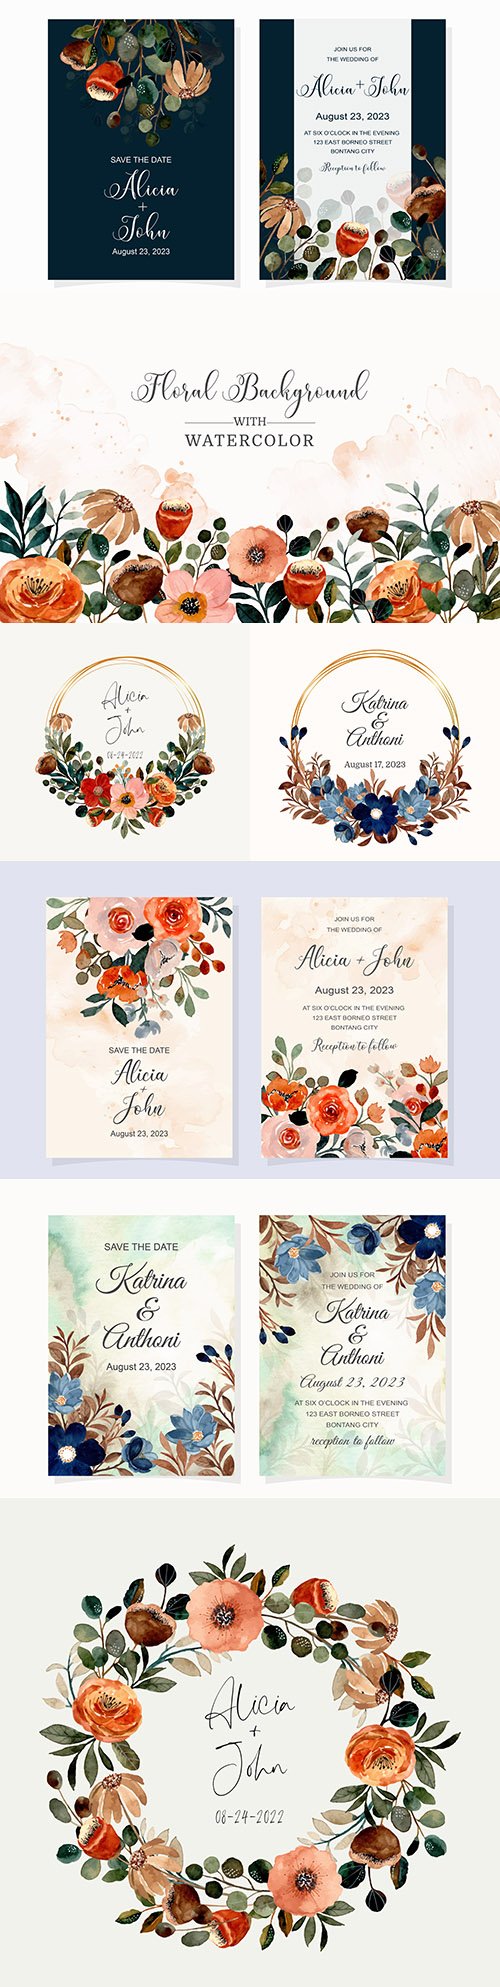 Wedding invitation with blue flower and brown watercolor leaves